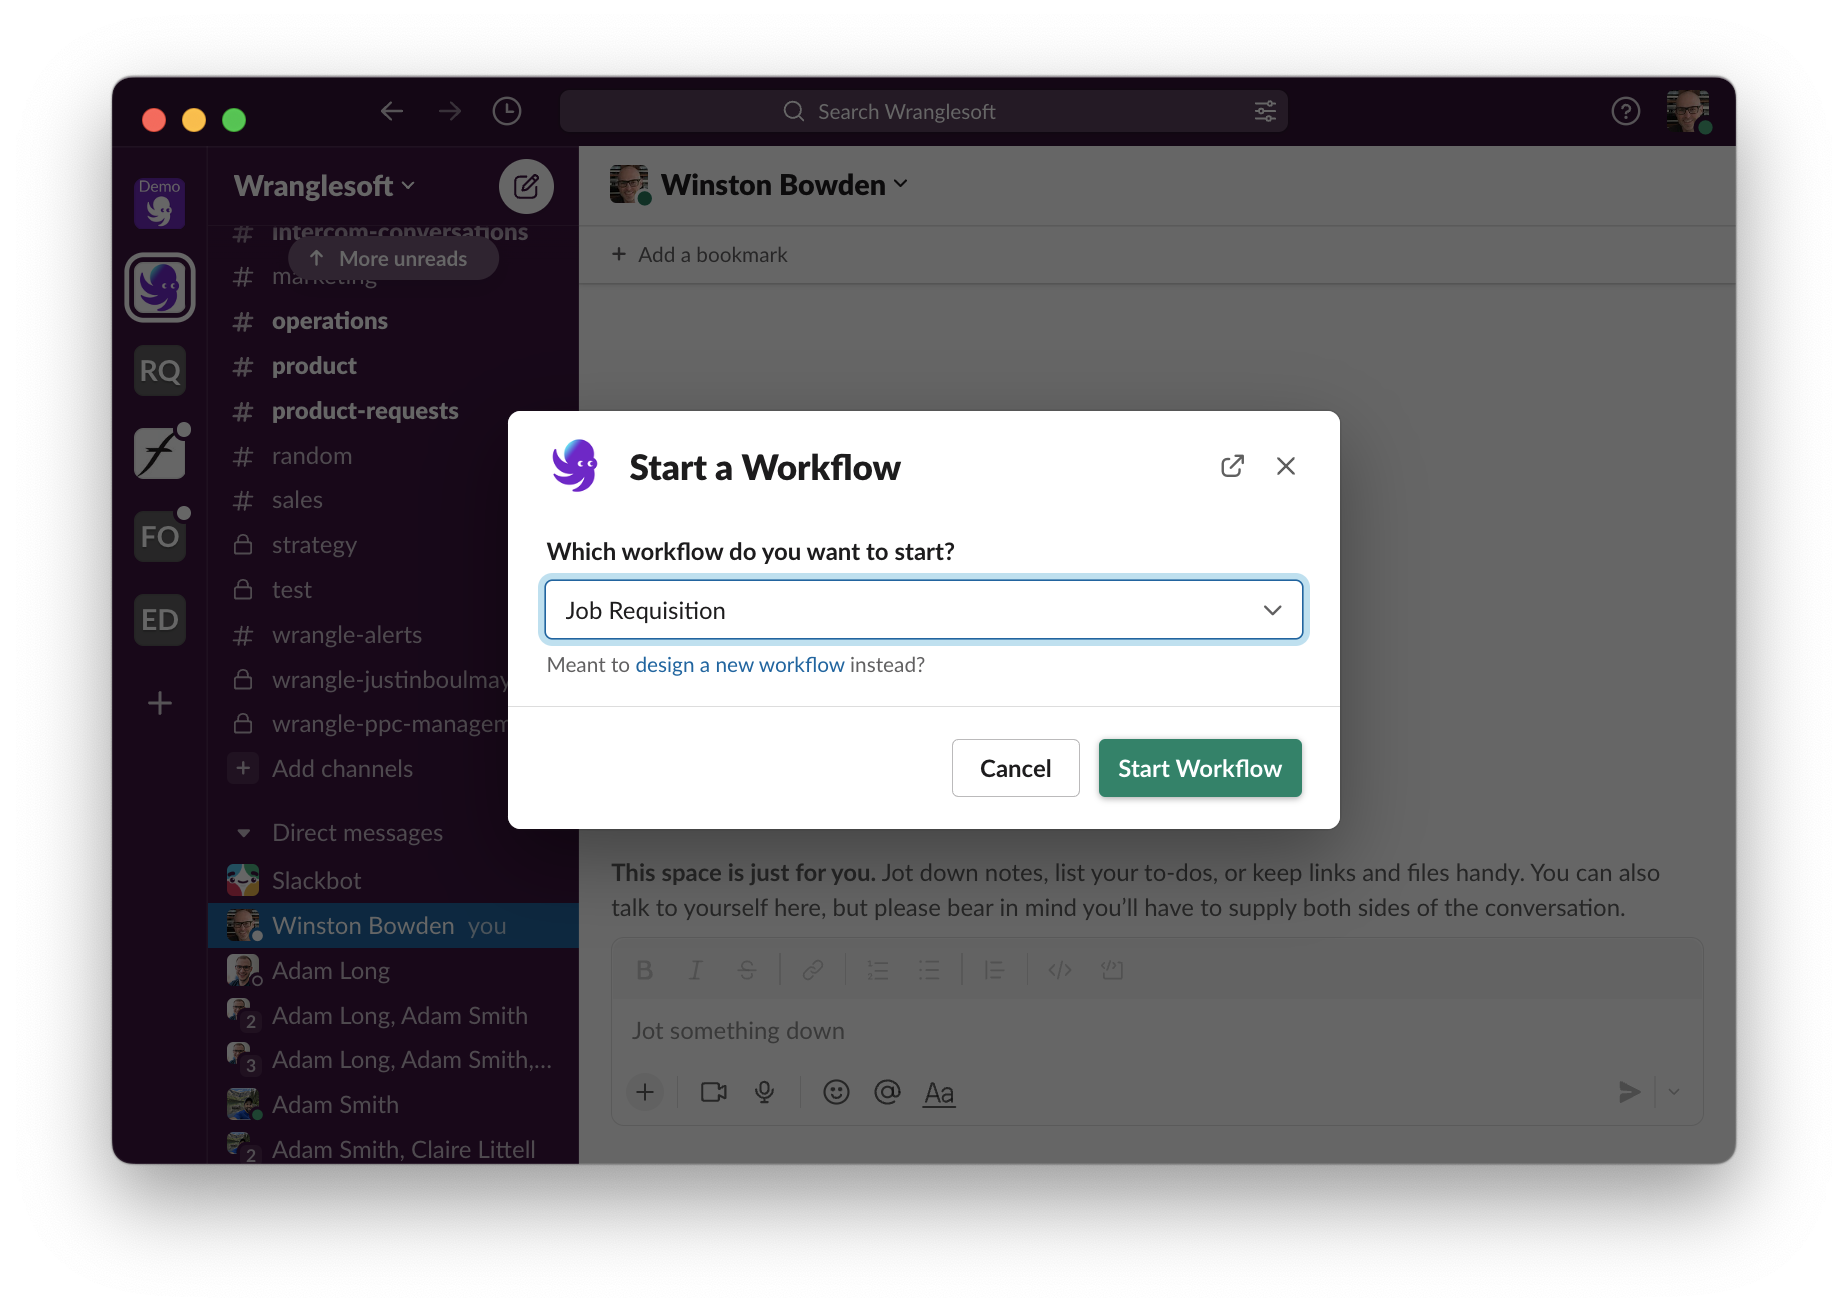 Your teams can create, manage and track their workflow from inside your company Slack channels